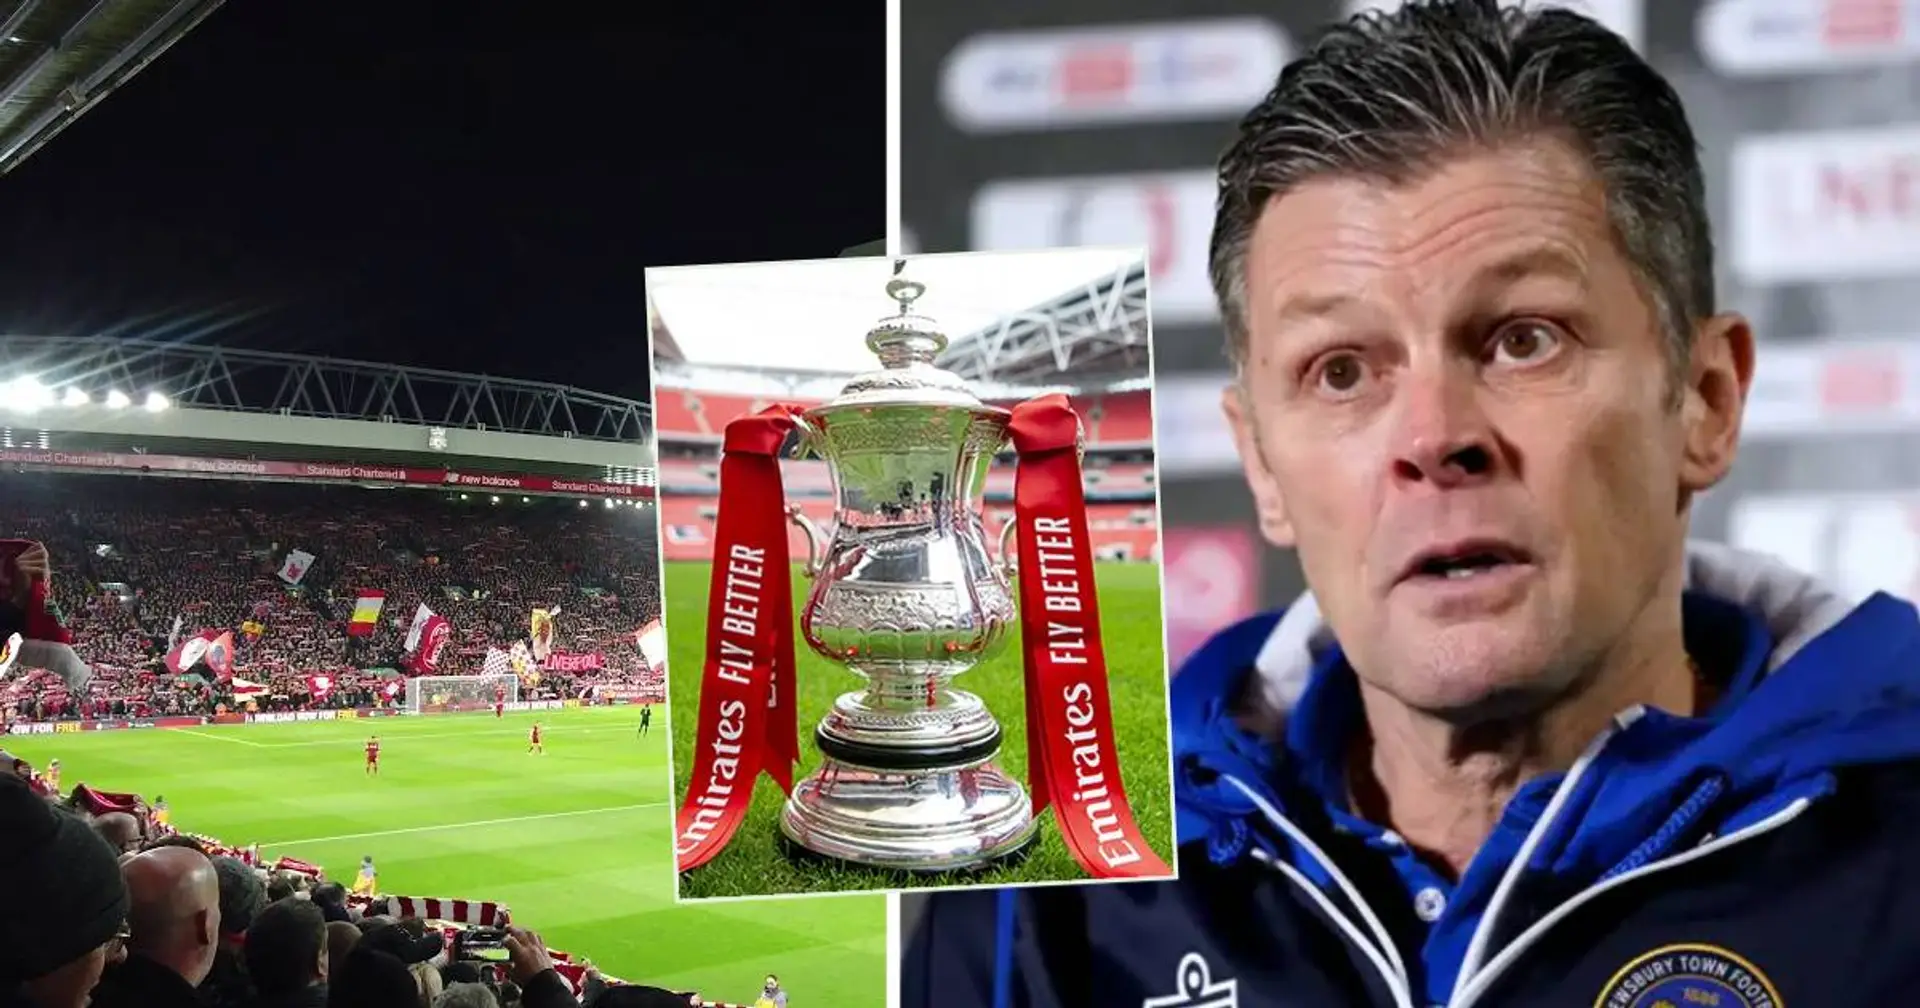 'My lads will never forget this occassion': Shrewbury boss applauds 'magnificent' Liverpool ahead of FA Cup clash